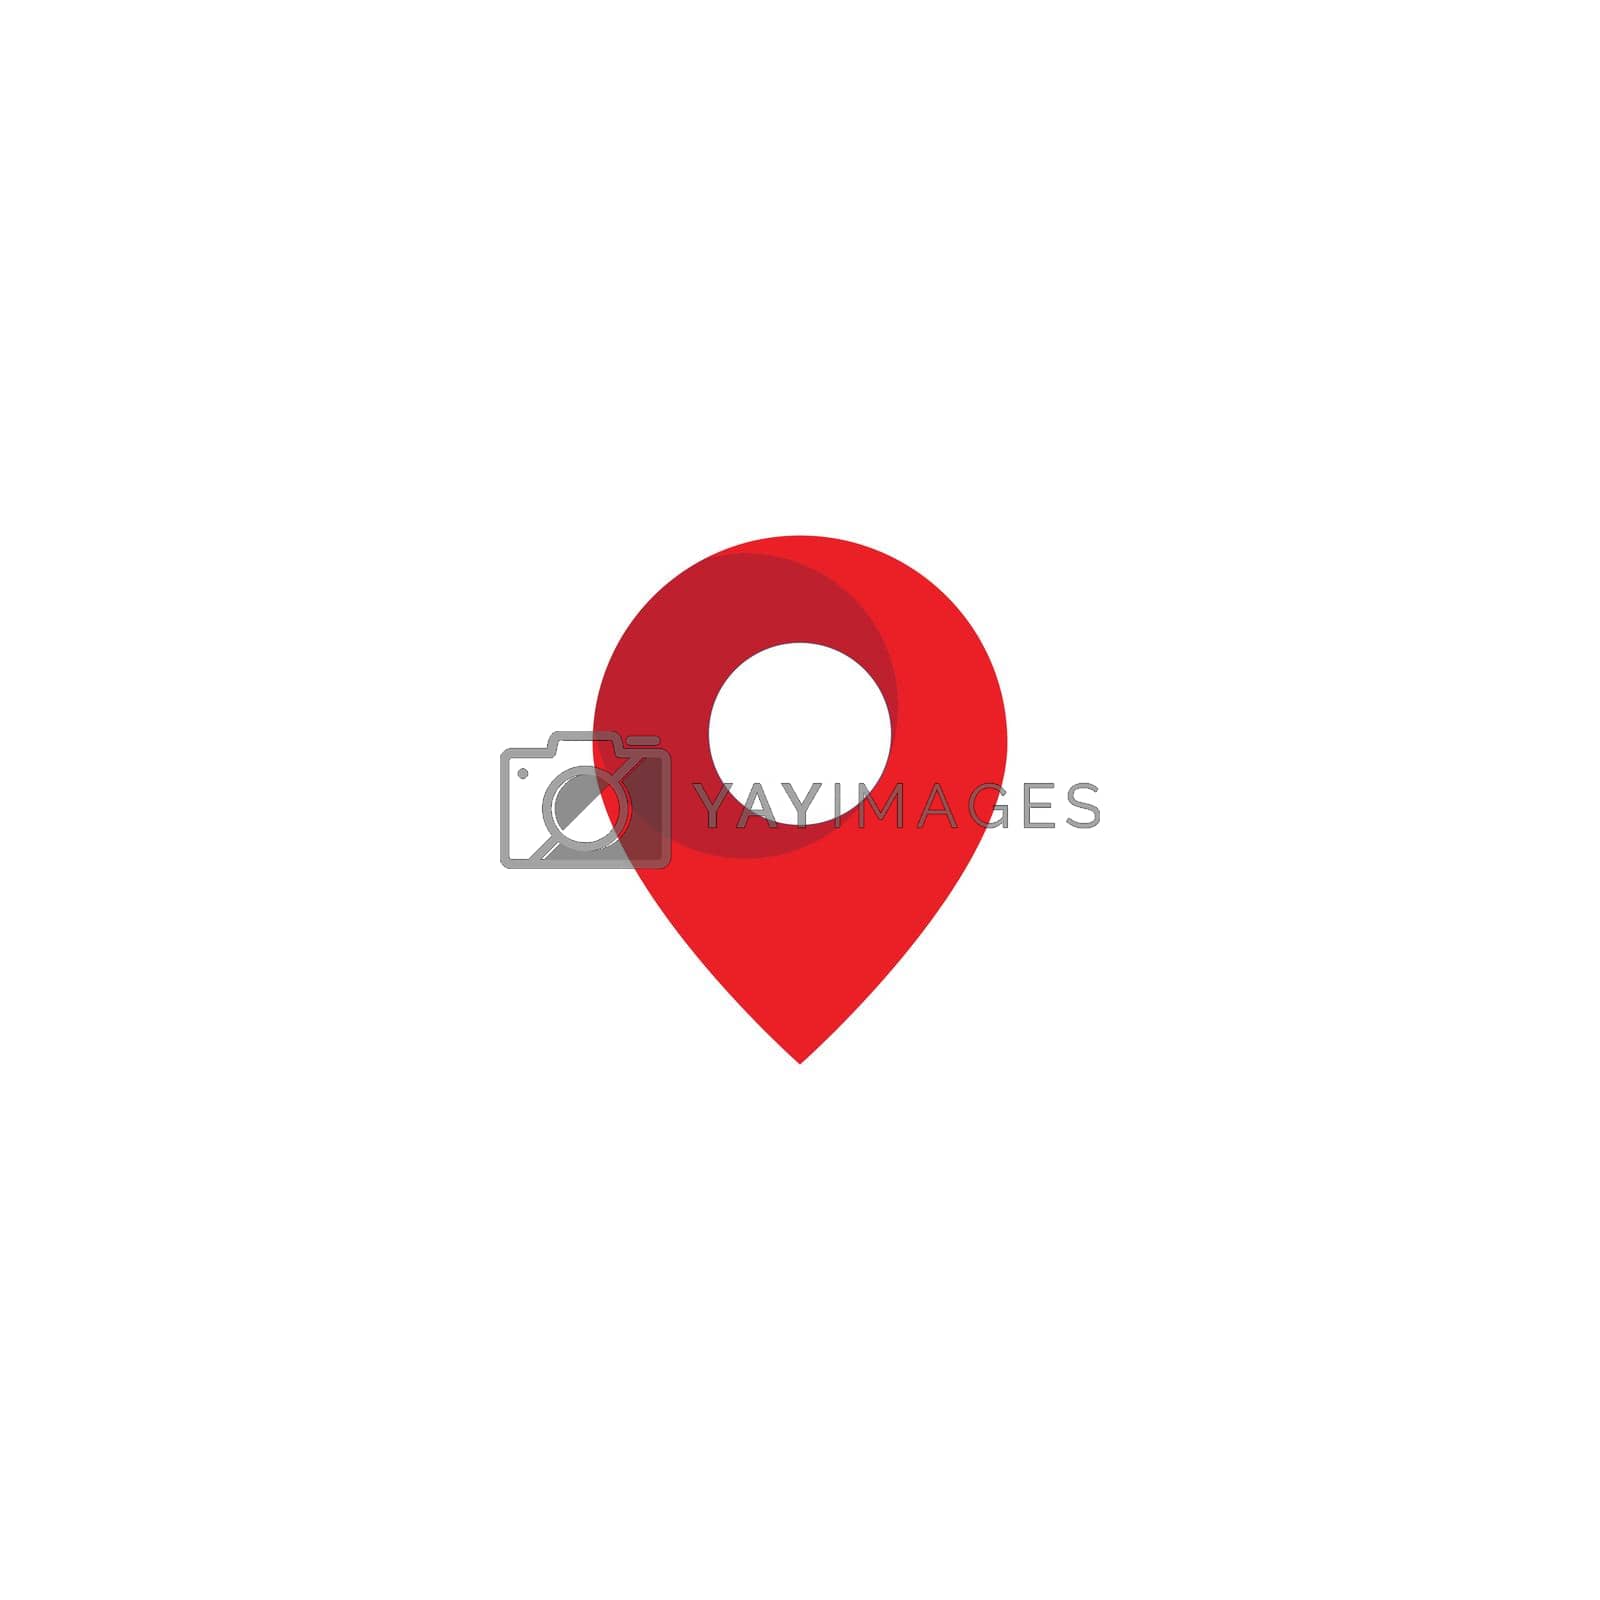 Royalty free image of Location point Logo by awk